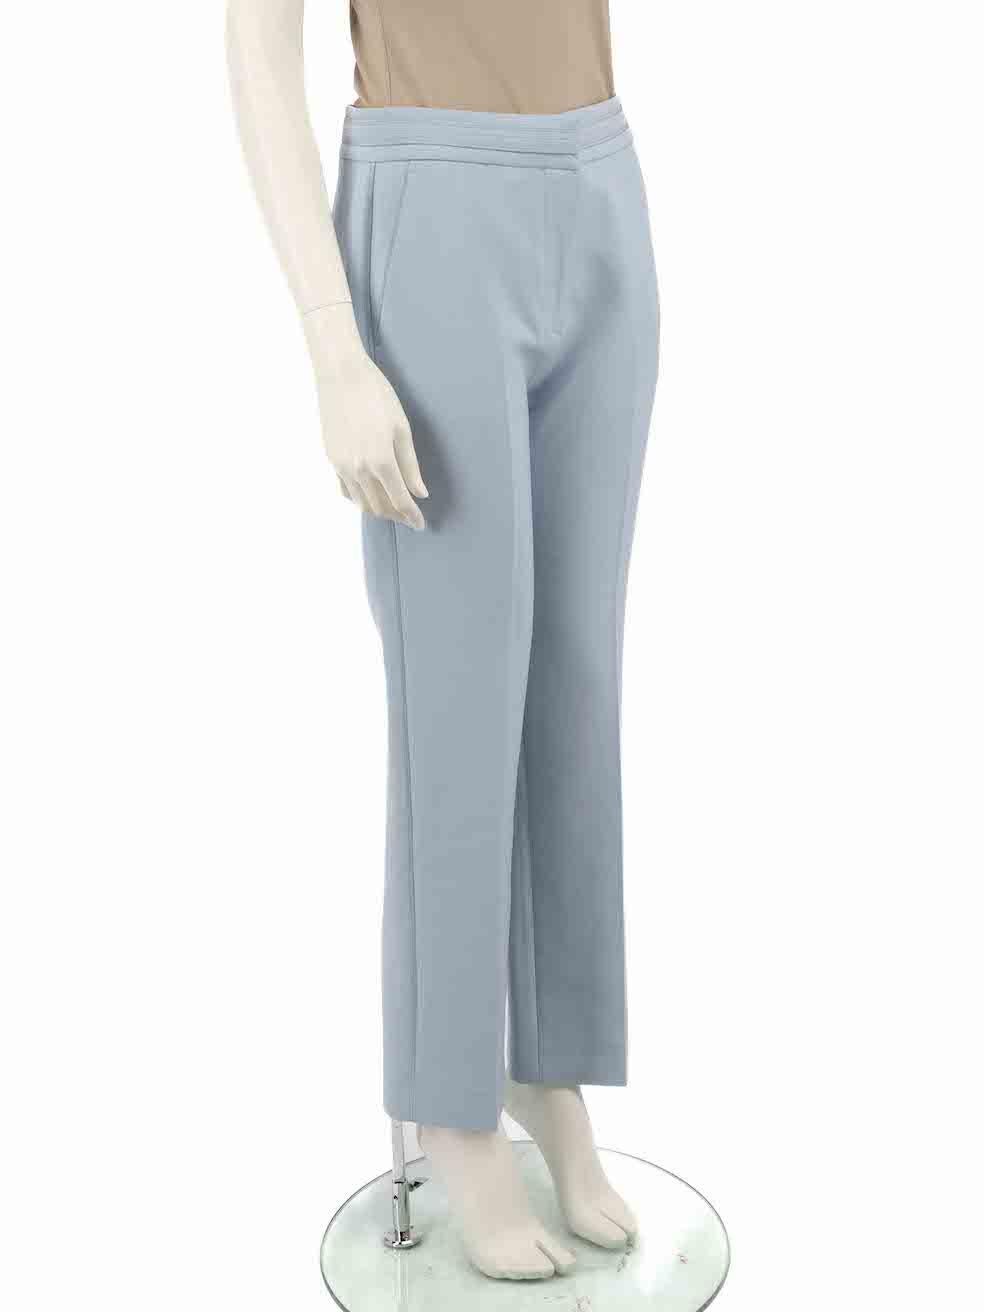 CONDITION is Very good. Hardly any visible wear to trousers is evident on this used Victoria Victoria Beckham designer resale item.
 
 
 
 Details
 
 
 Blue
 
 Polyester
 
 Straight leg trousers
 
 Mid rise
 
 Front zip closure with clasp and